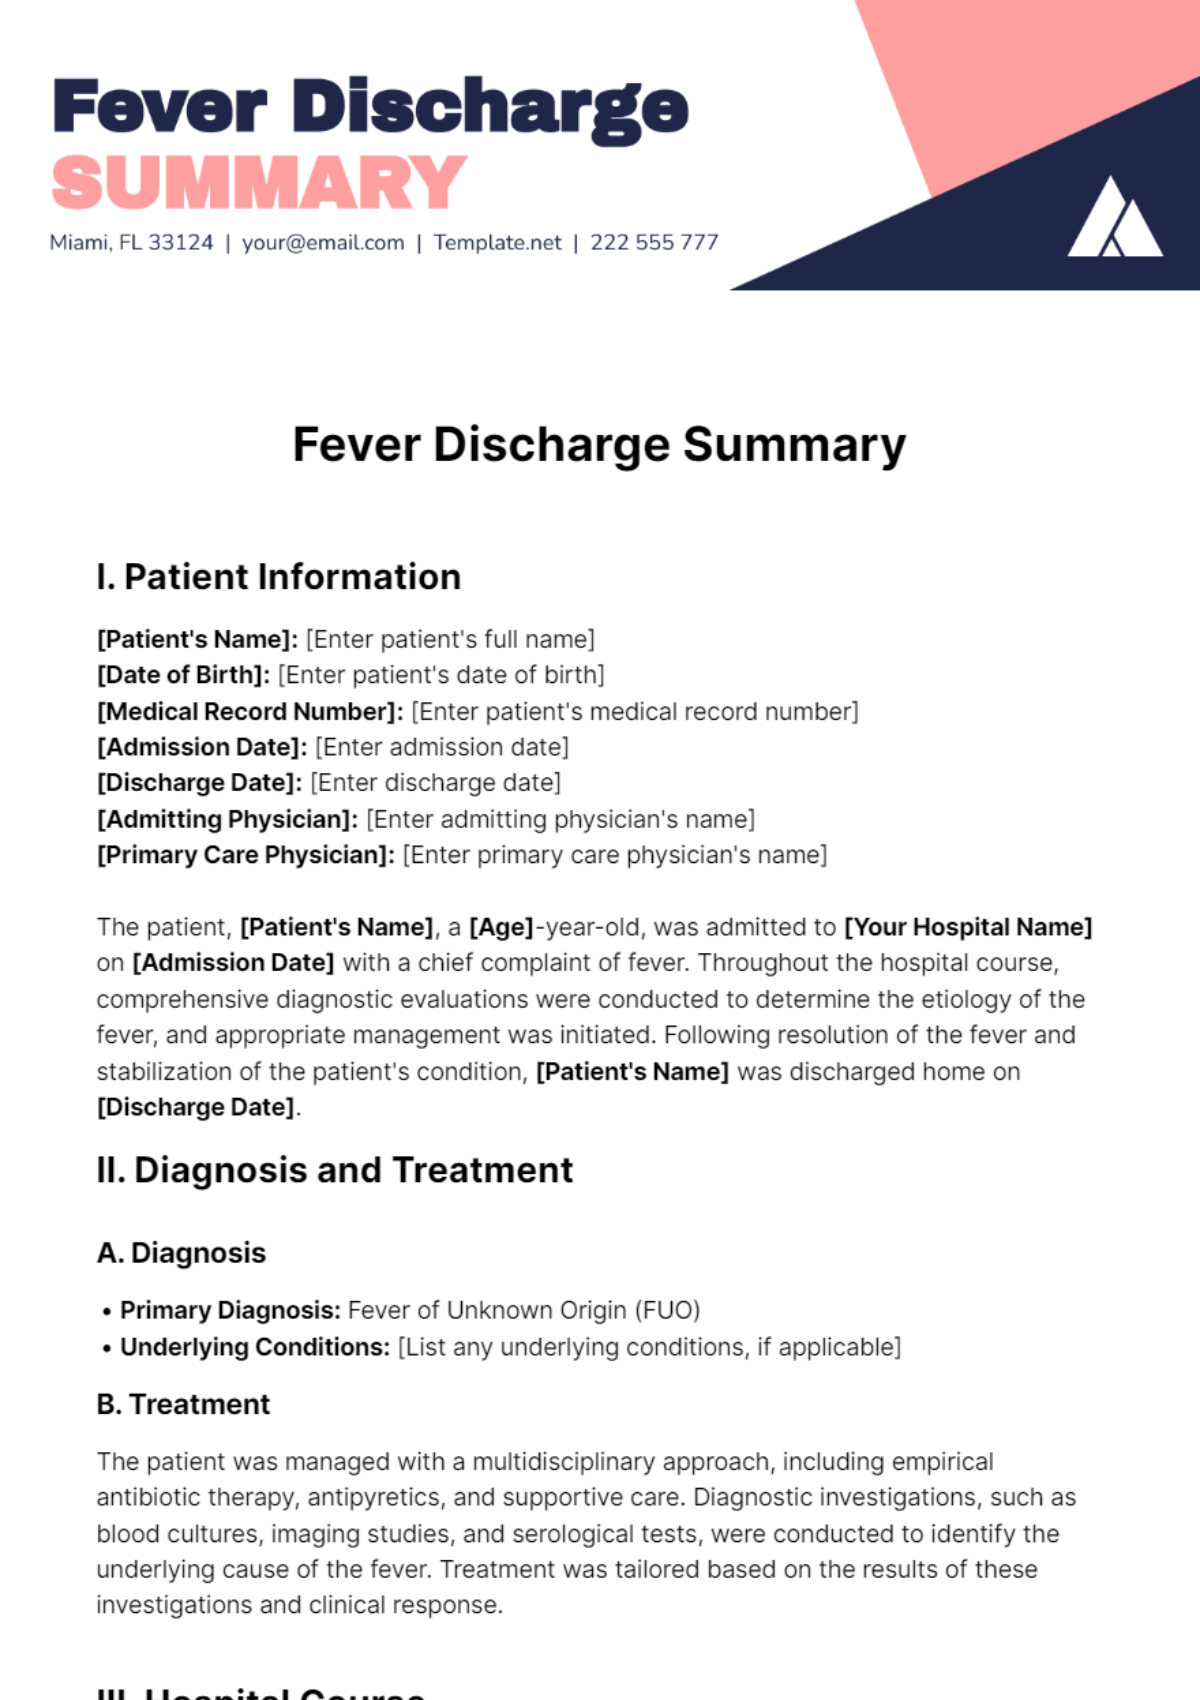 Fever Discharge Summary Template